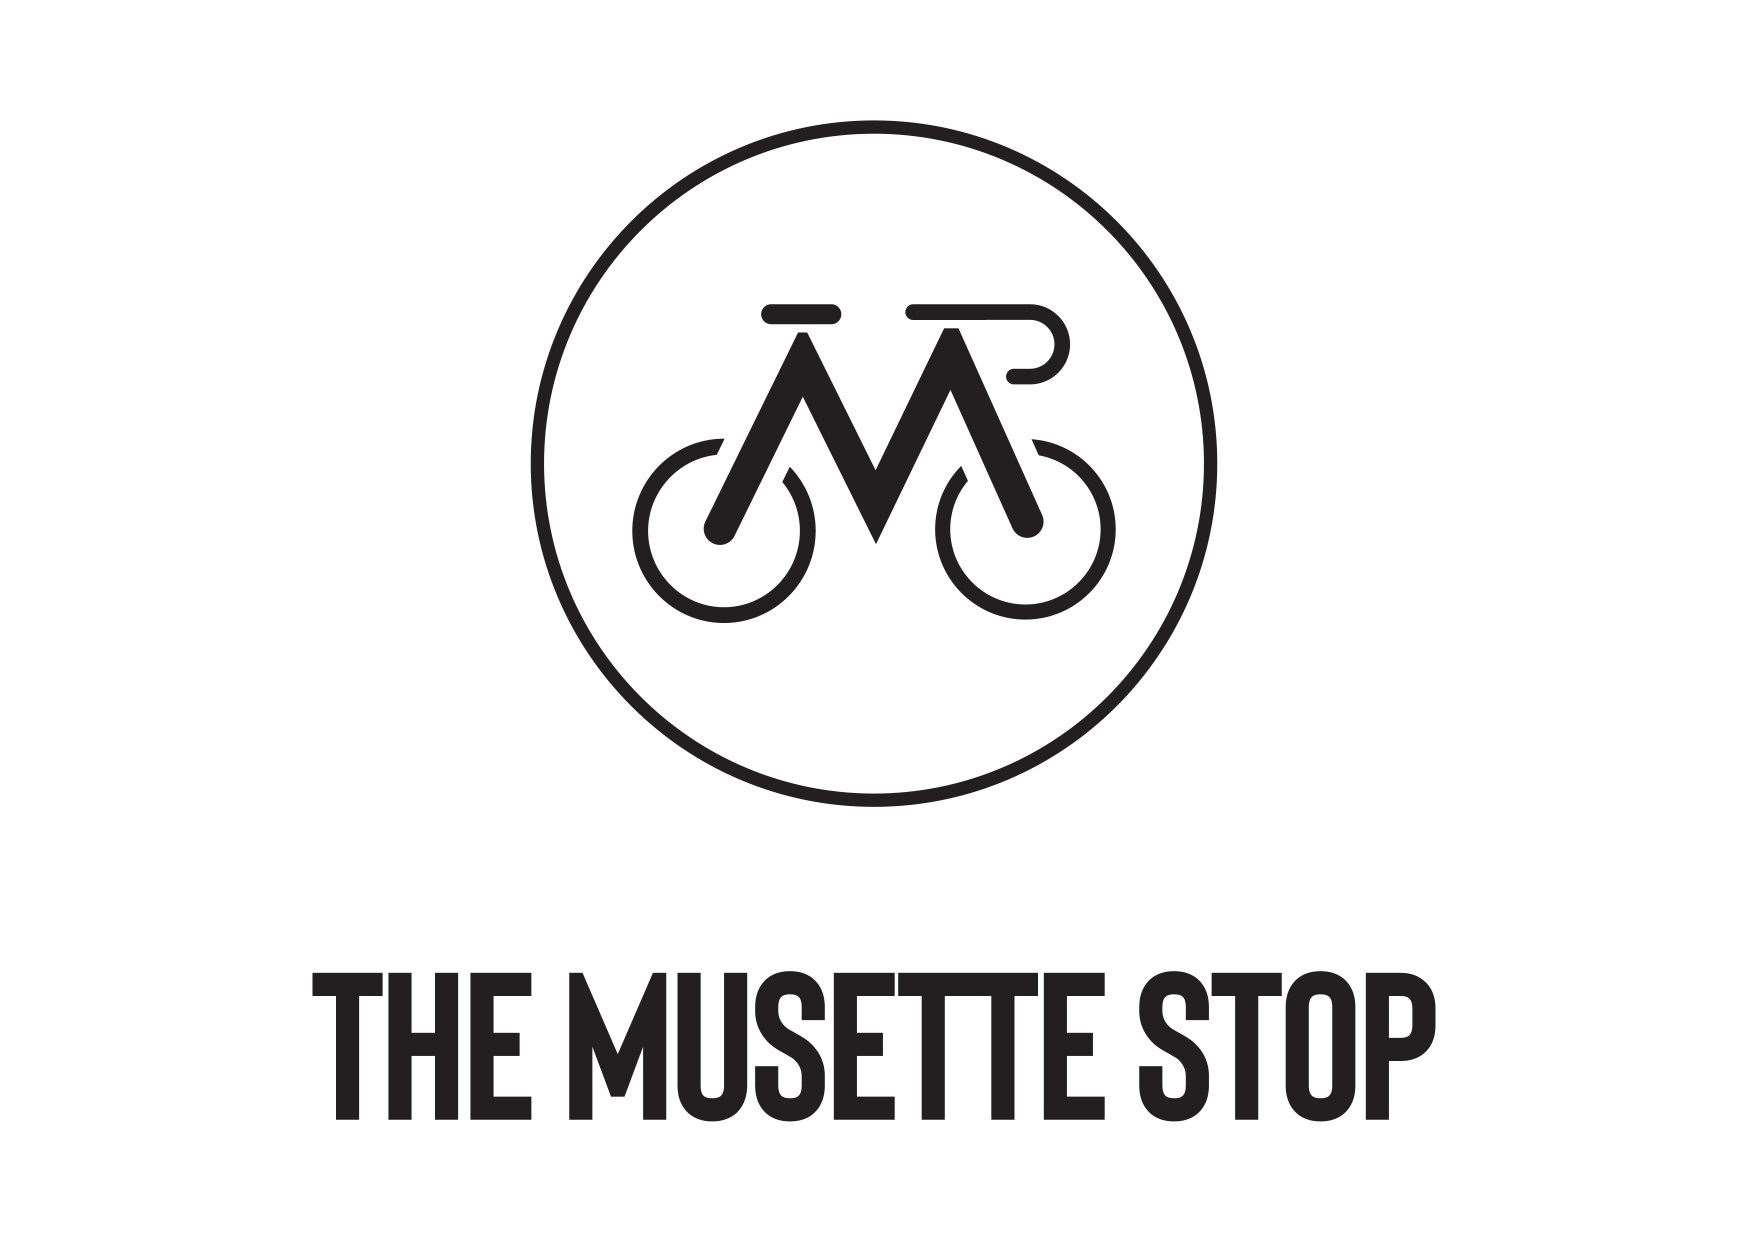 The Musette Stop logo